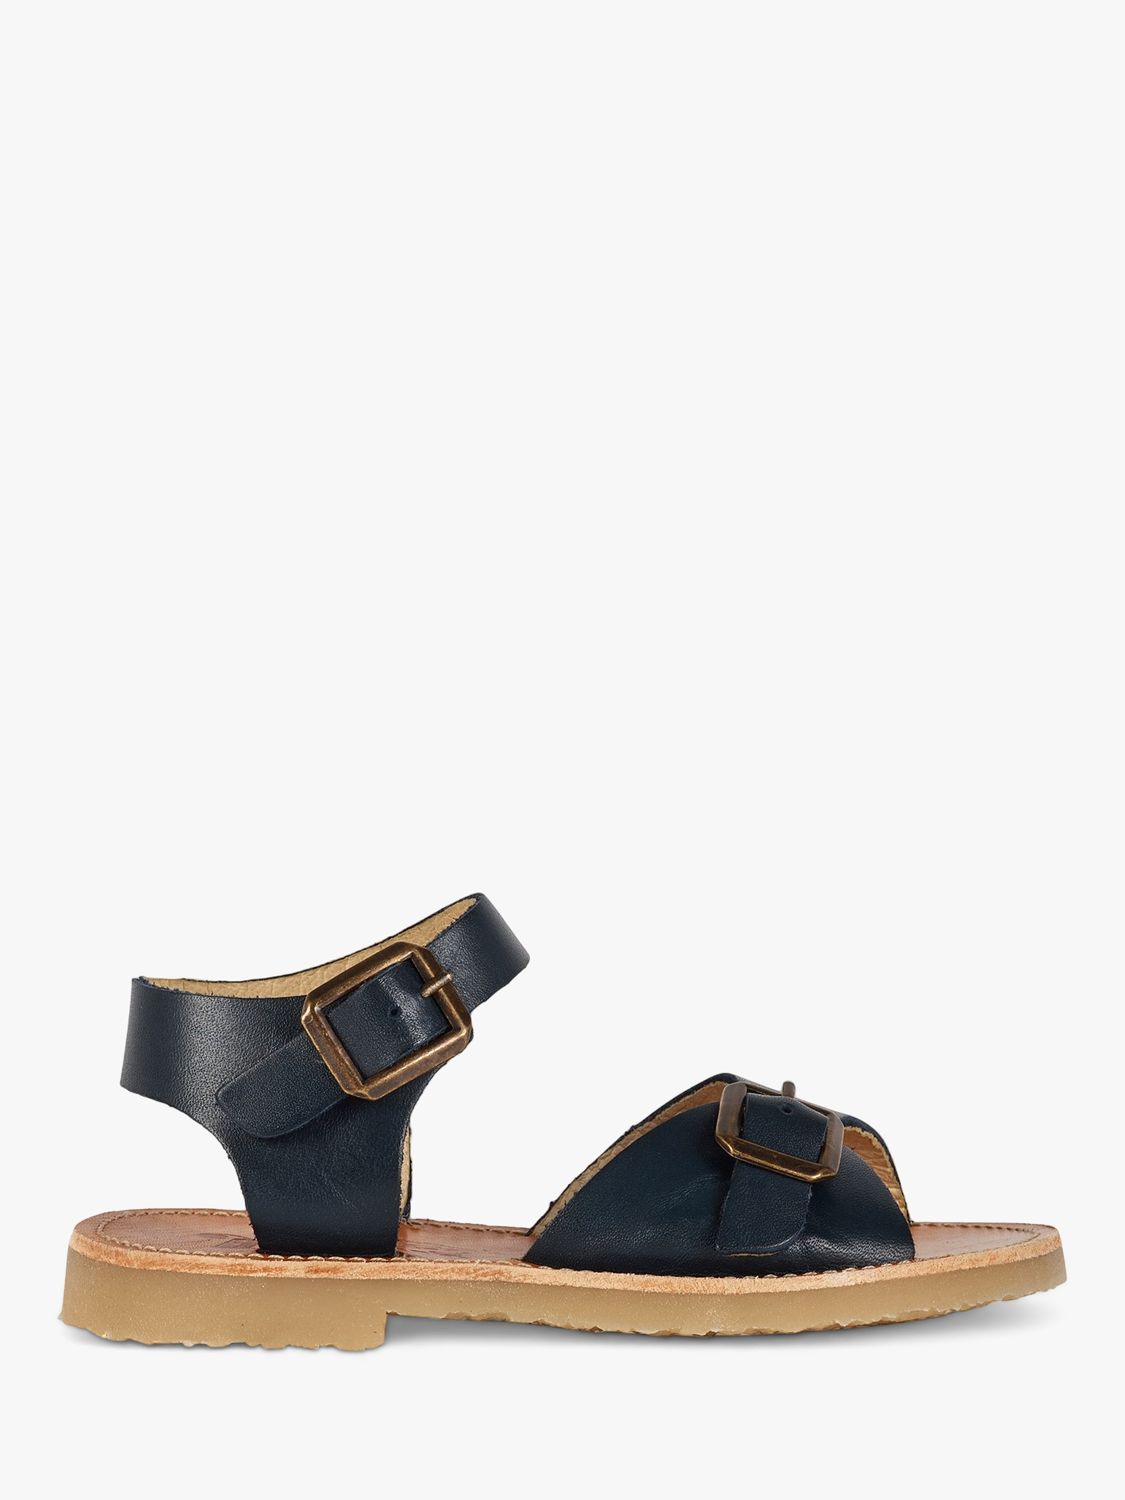 Buy Young Soles Kids' Sonny Two Part Leather Sandals Online at johnlewis.com